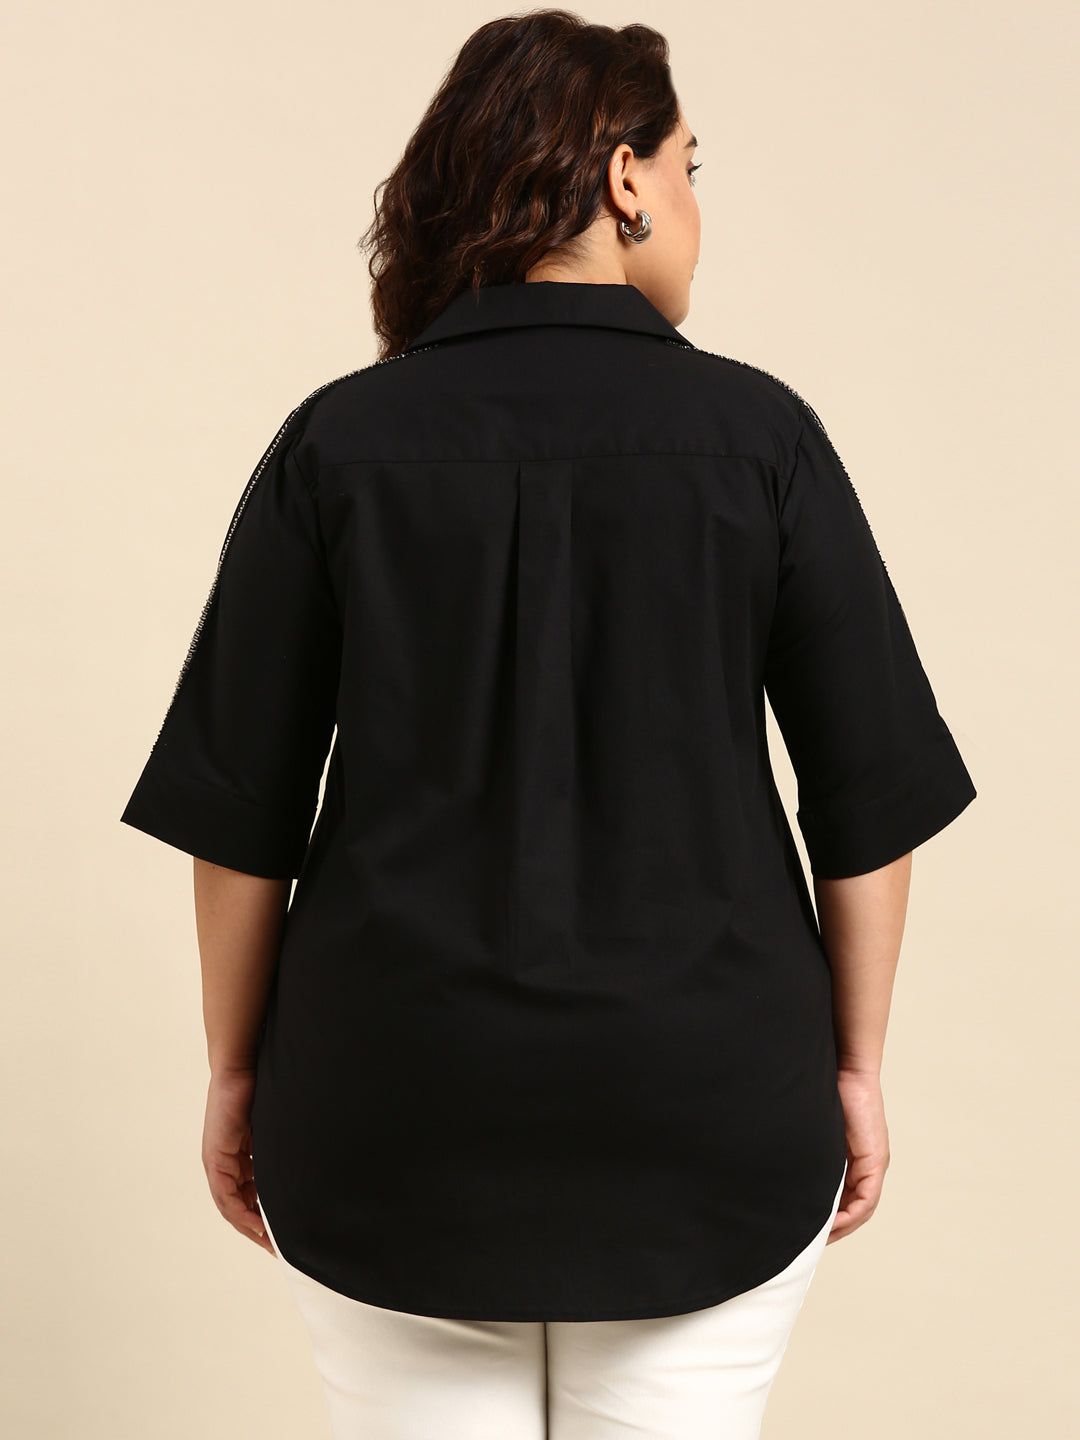 BLACK CASUAL SHIRT WITH LACE EMBELLISHMENT